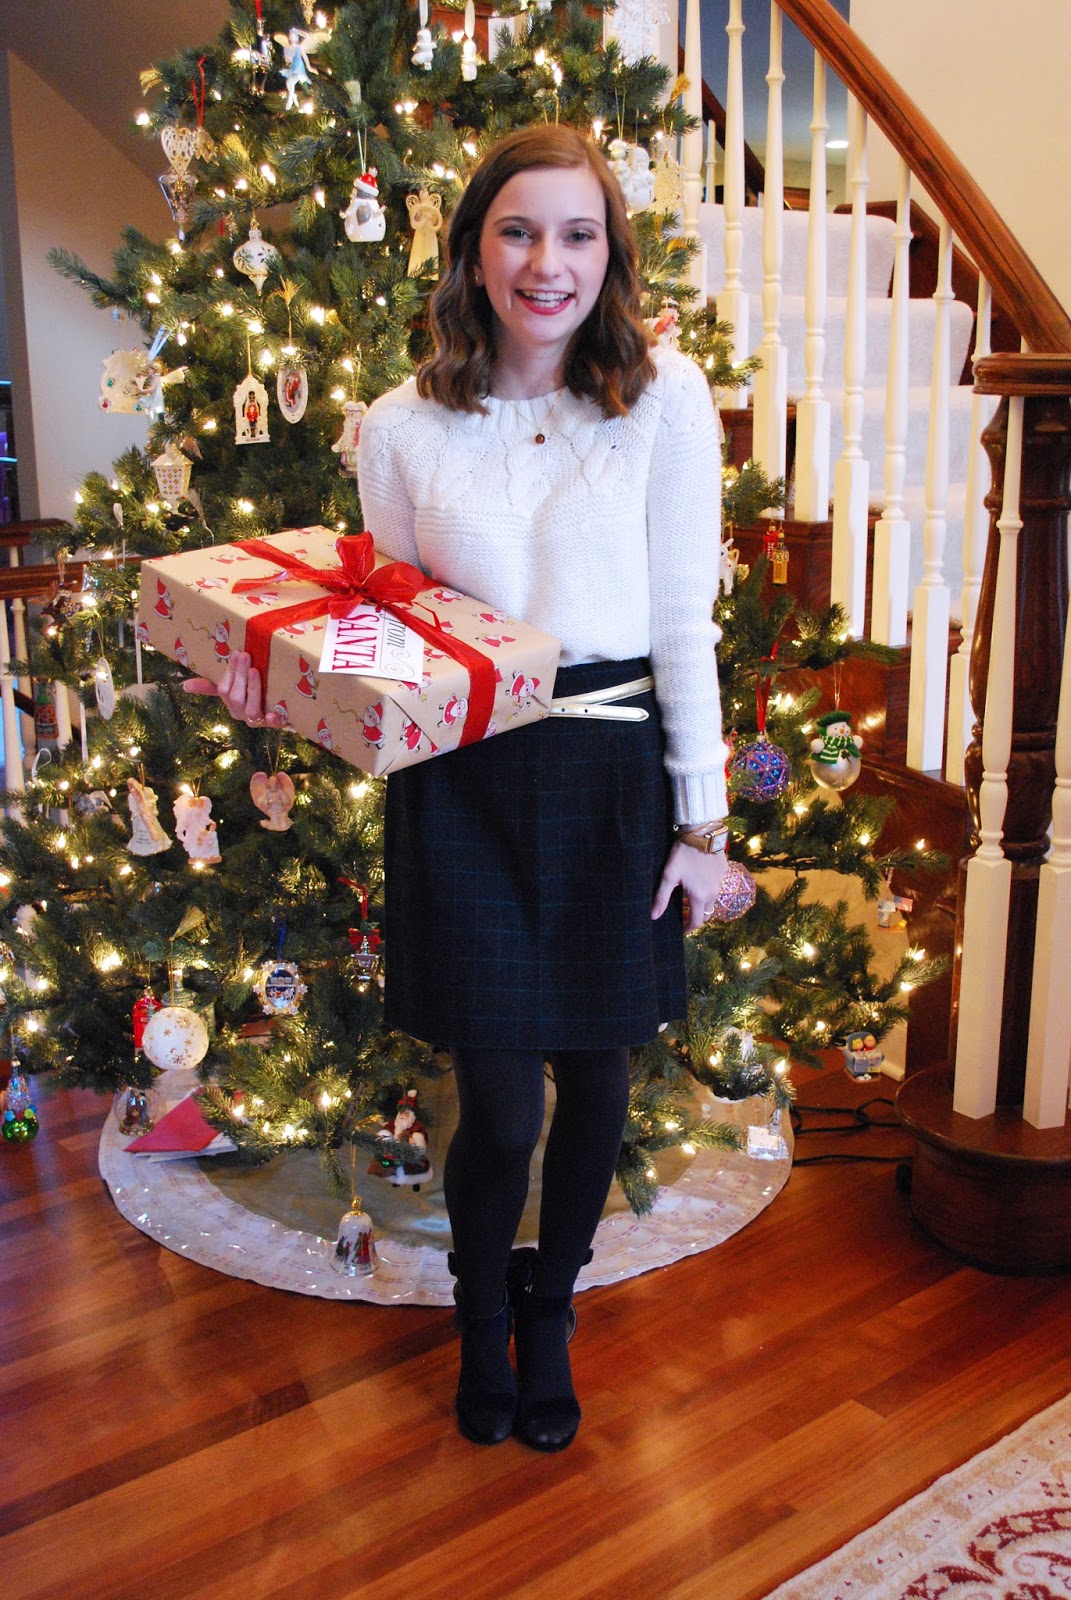 Sew Cute: Sew Cute Holiday: Christmas Outfit Idea